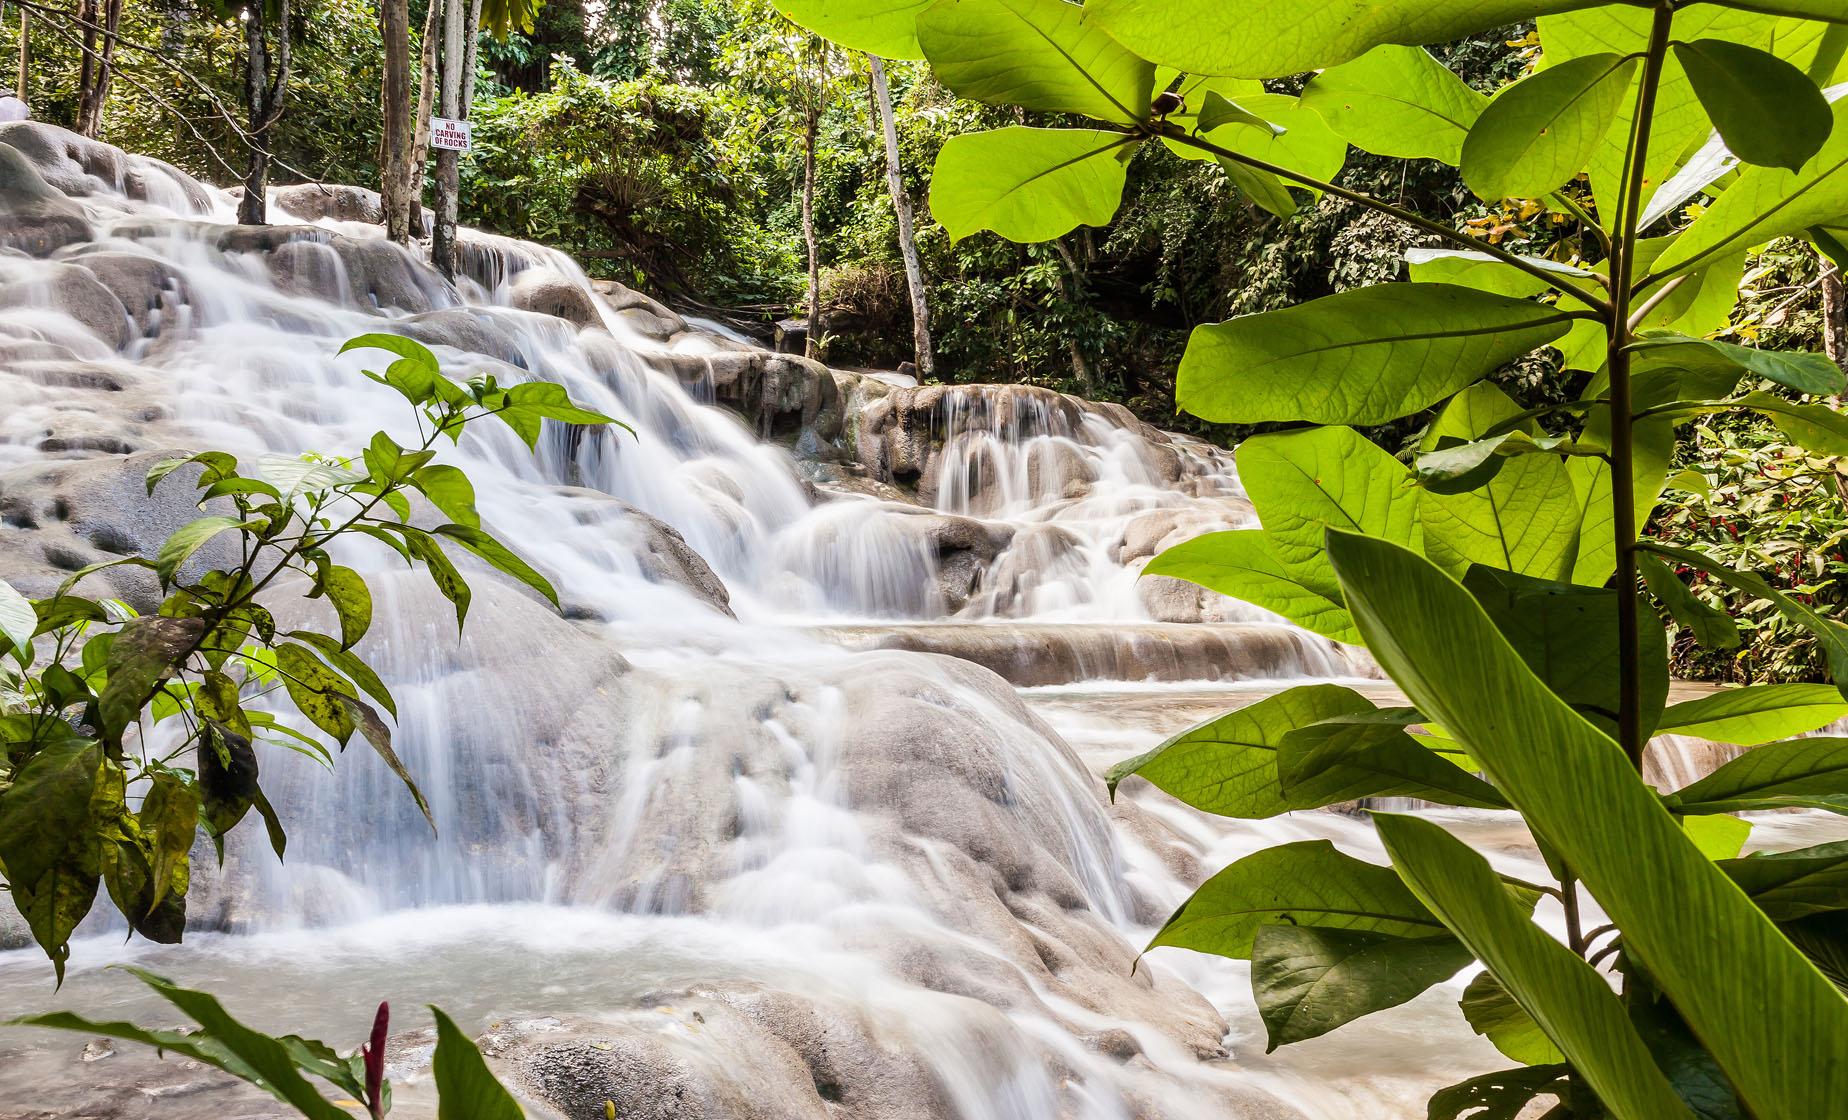 Private Ocho Rios Dunn's River Falls and Area Highlights